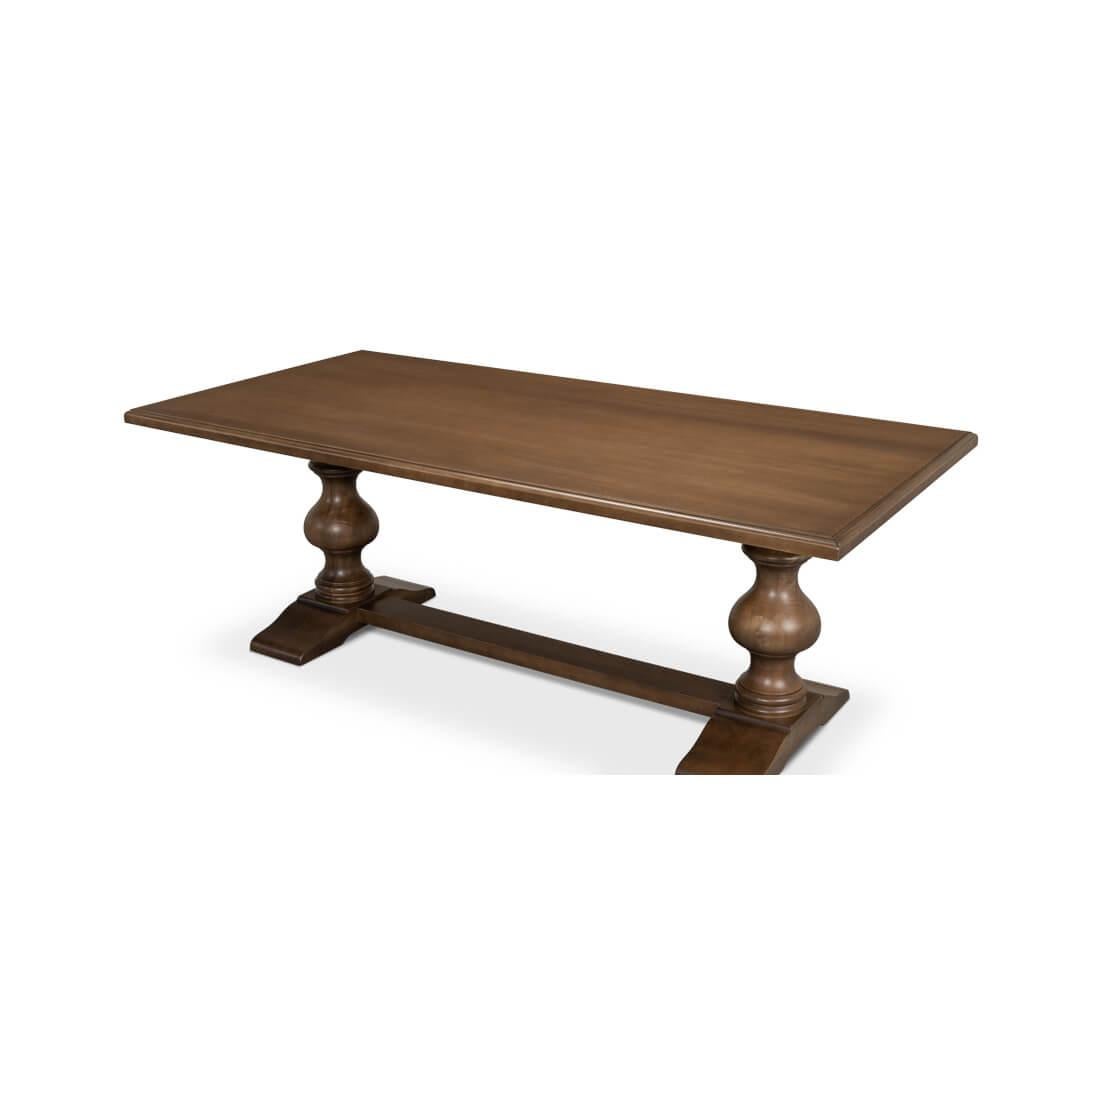 Baroque French Provincial Refectory Table For Sale